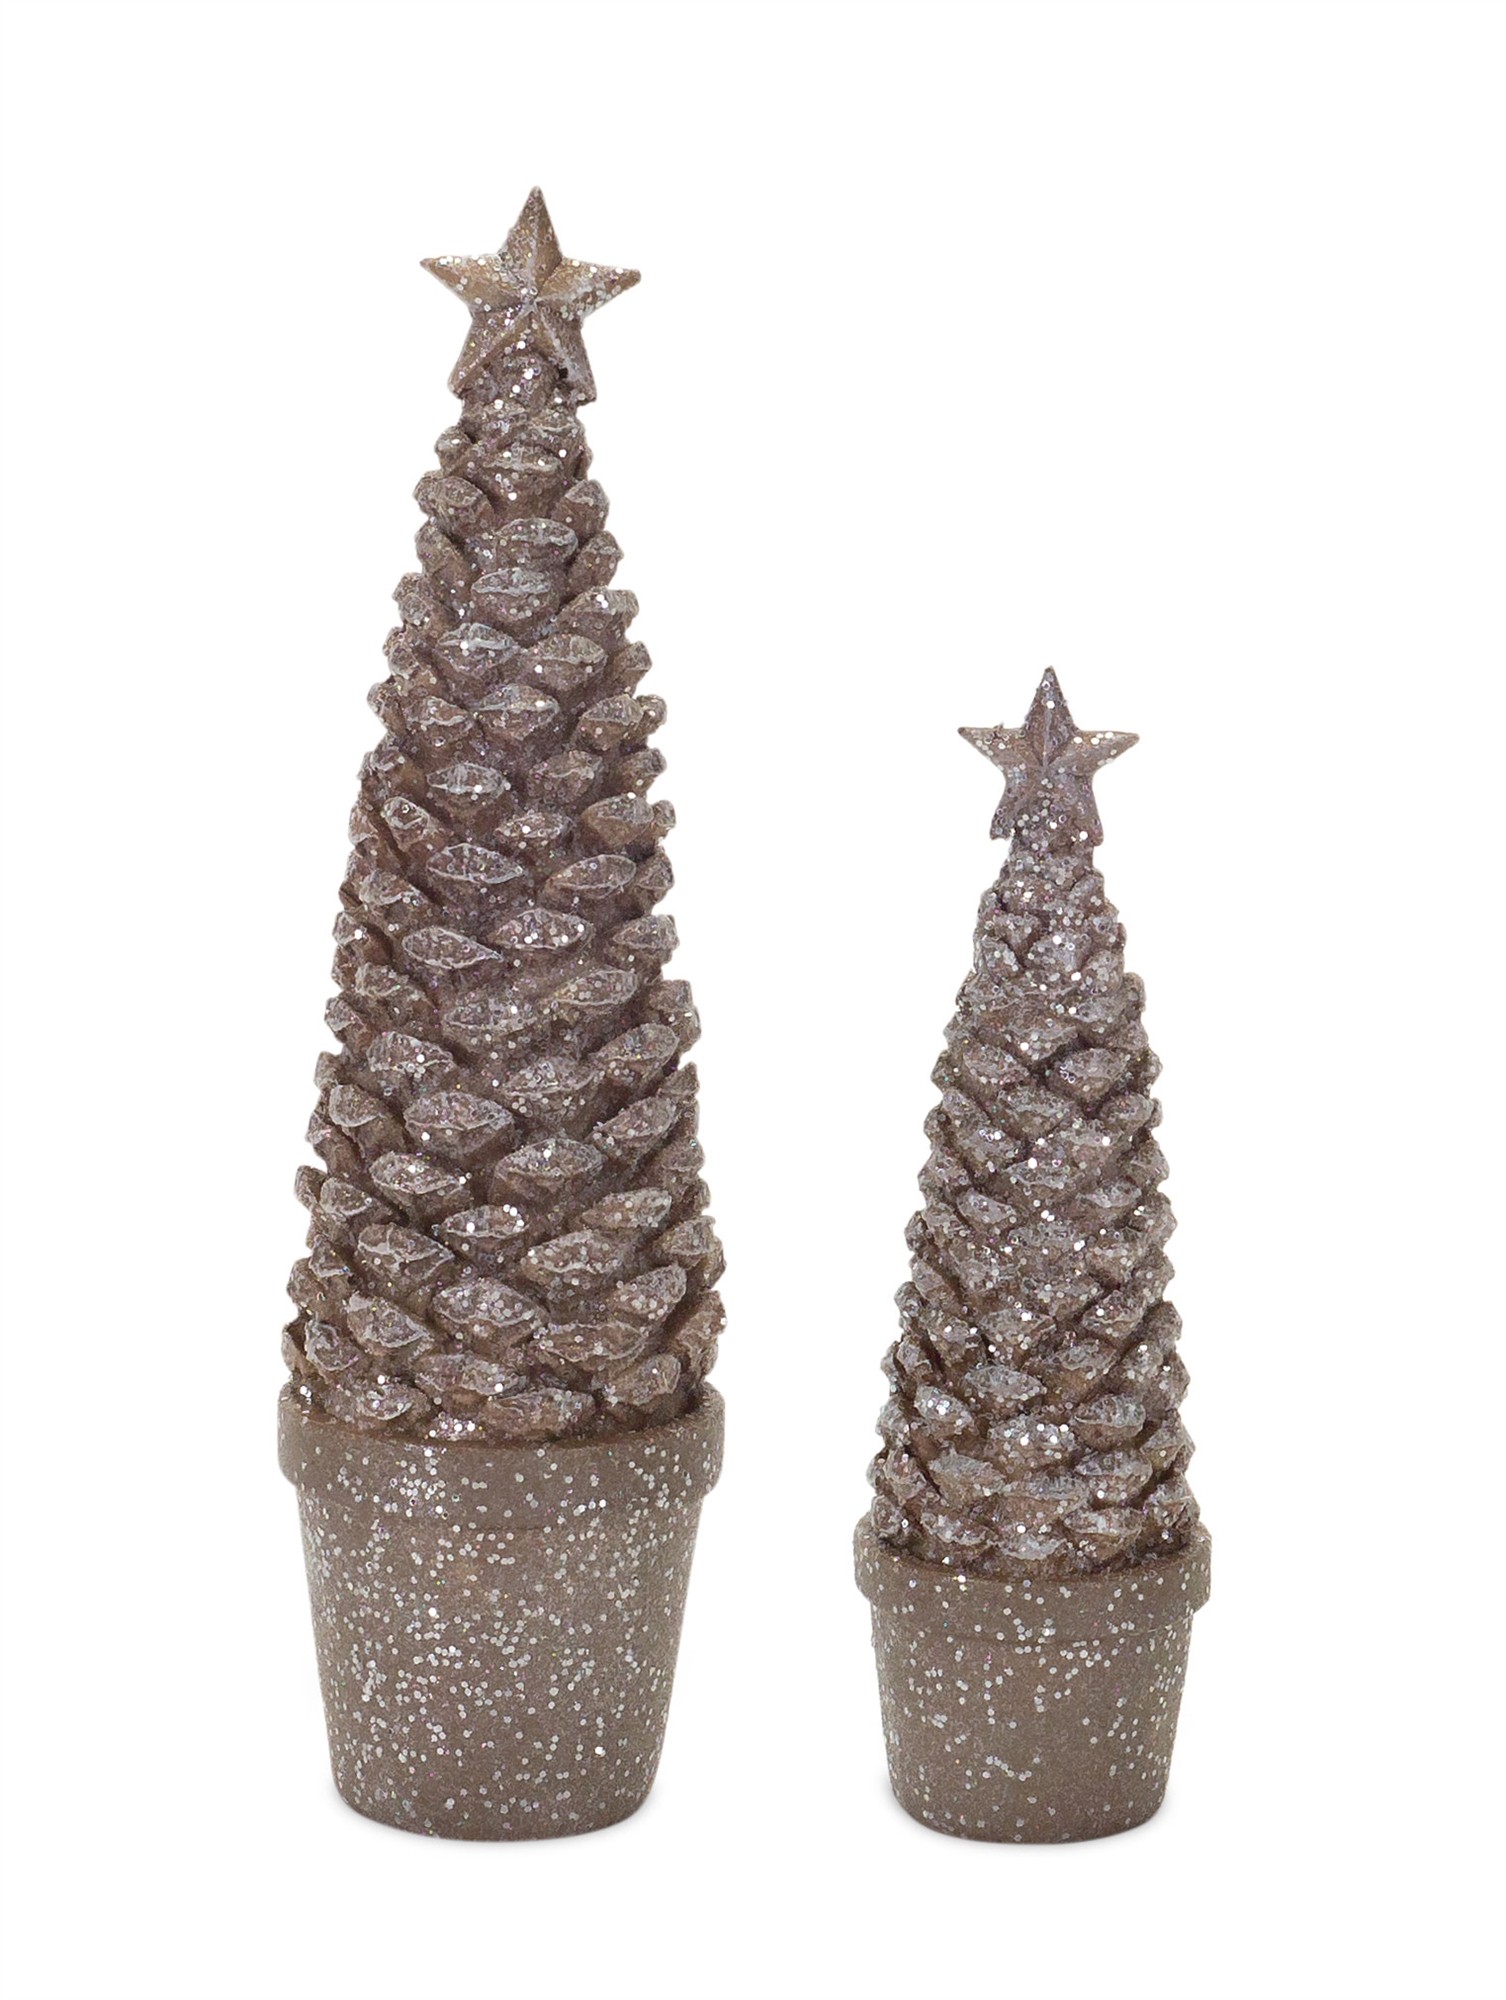 Potted Pine Cone Tree (Set of 4) 7.25"H, 10.25"H Resin